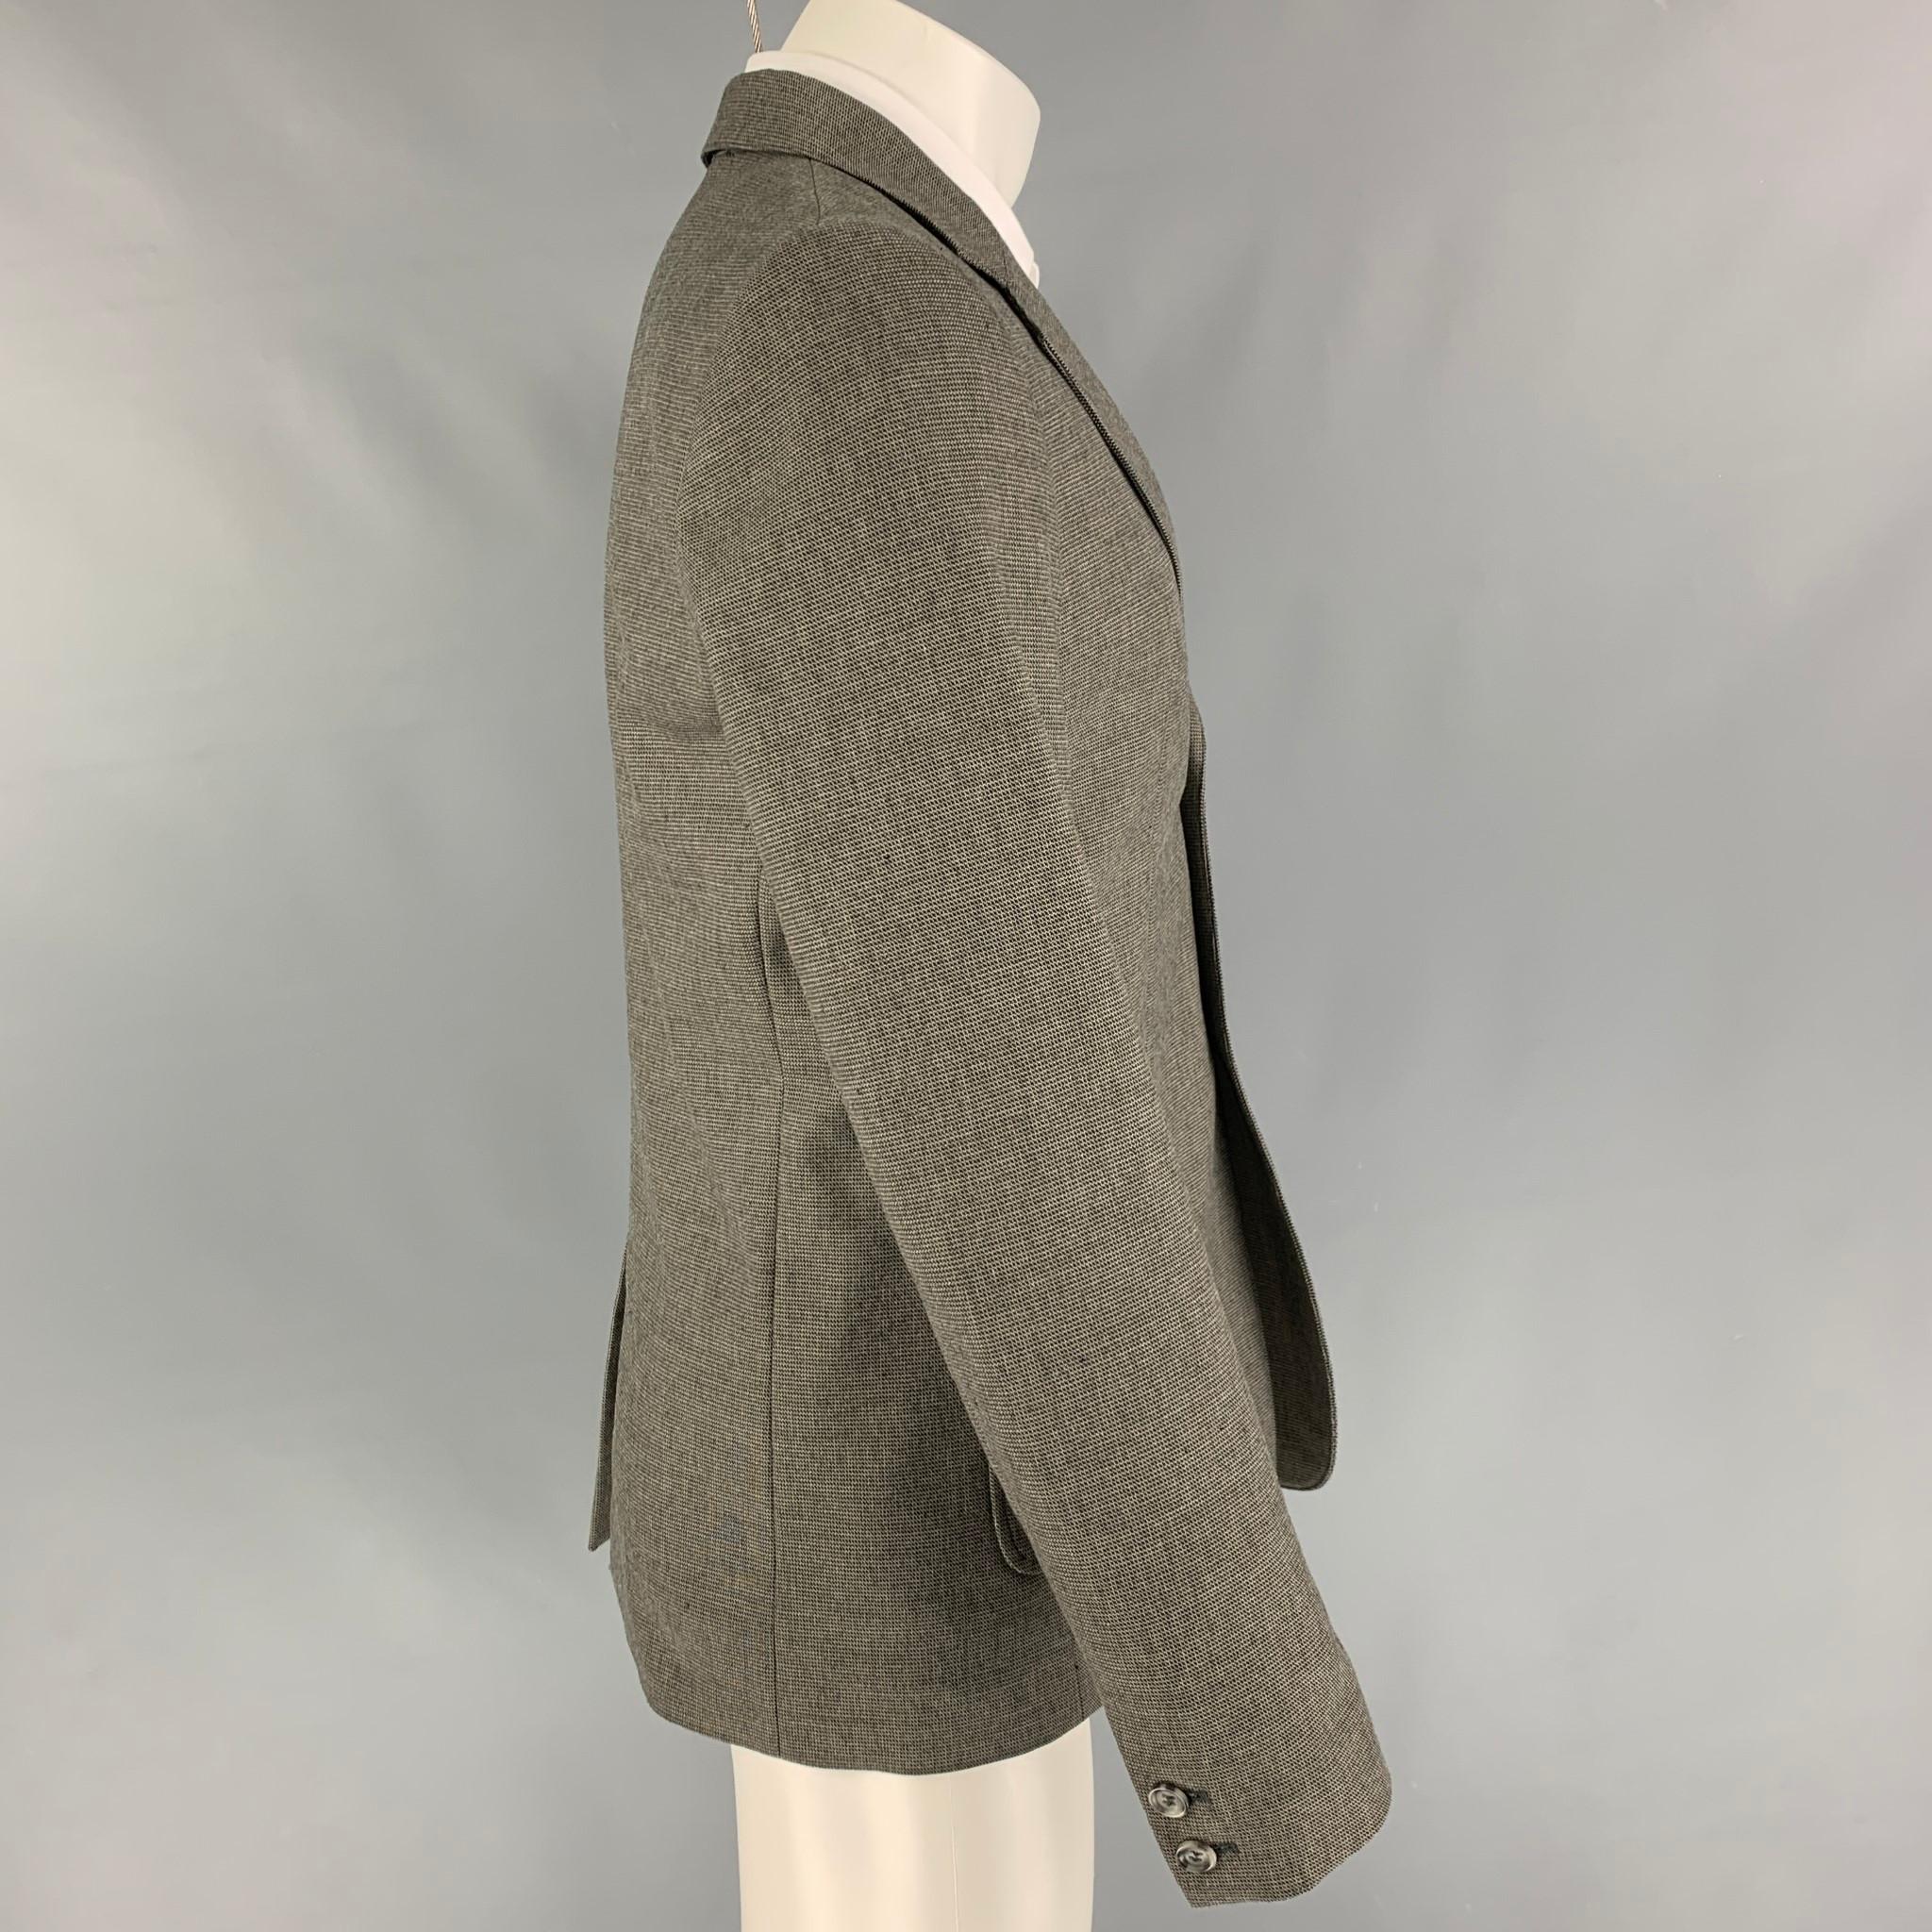 A.P.C sport coat comes in a grey & cream wool with a full liner featuring a notch lapel, patch pockets, single back vent, and a double button closure. 

Very Good Pre-Owned Condition.
Marked: M
Original Retail Price: